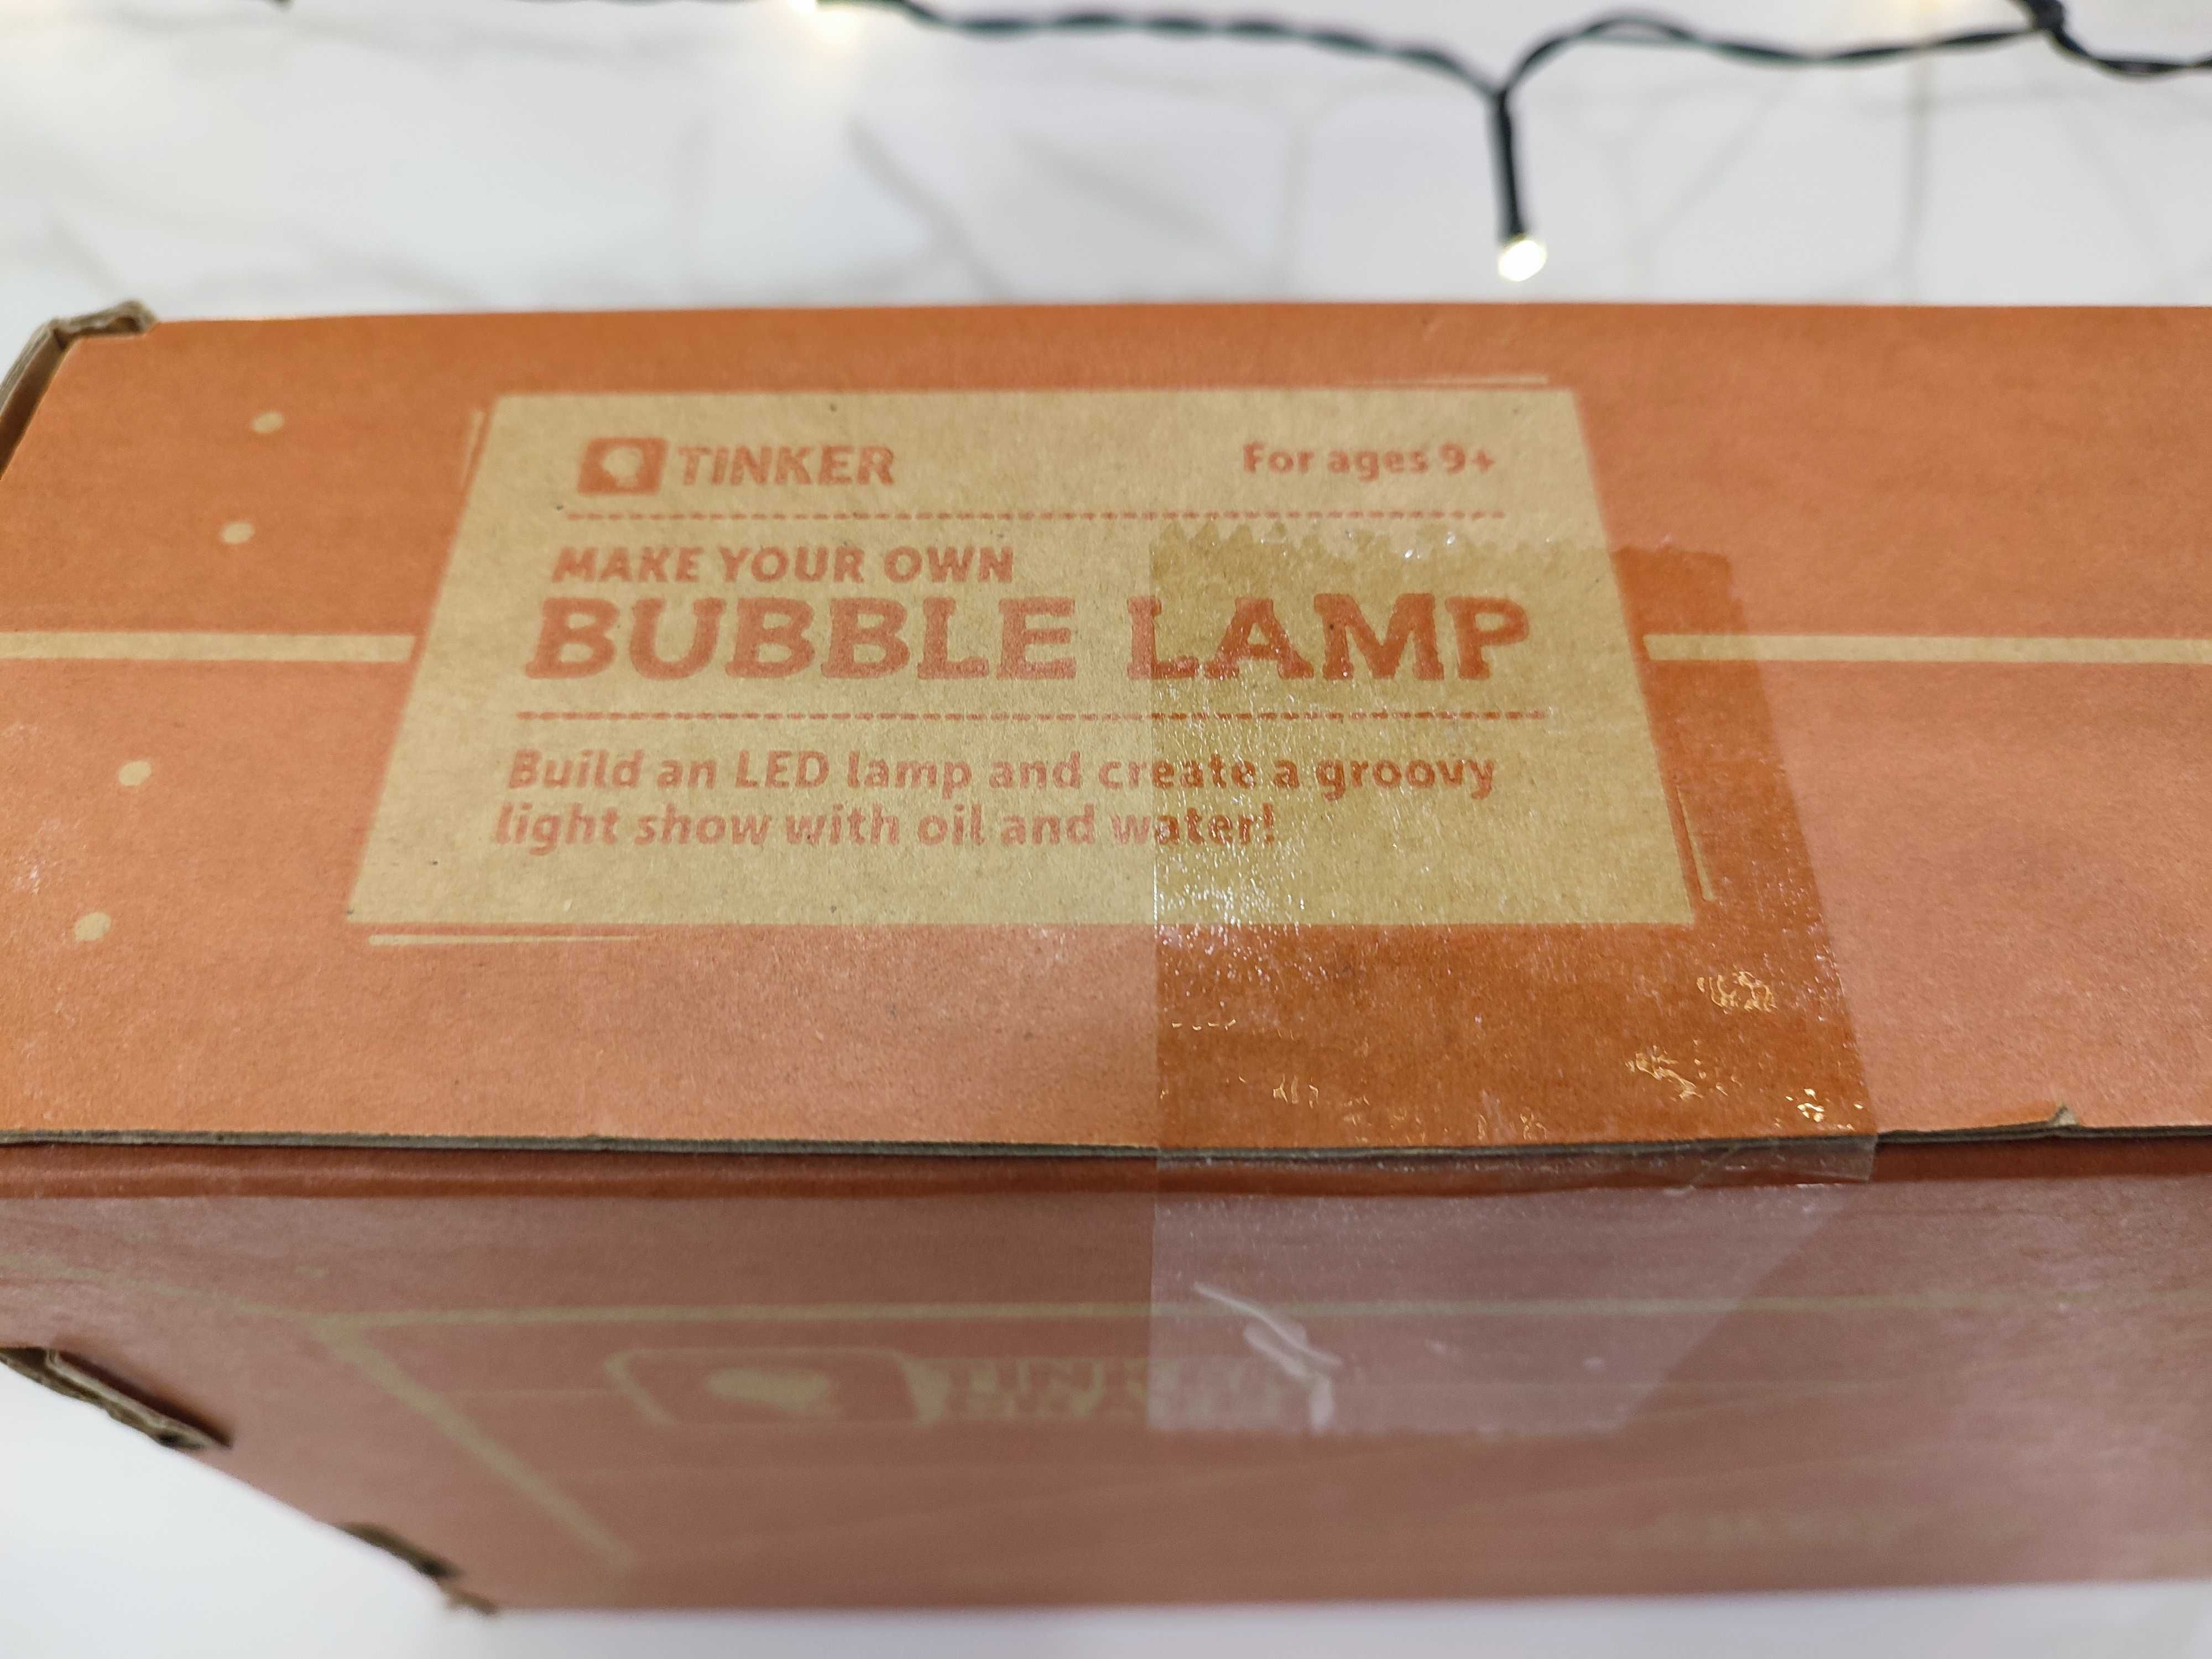 Bubble lamp tinker crate